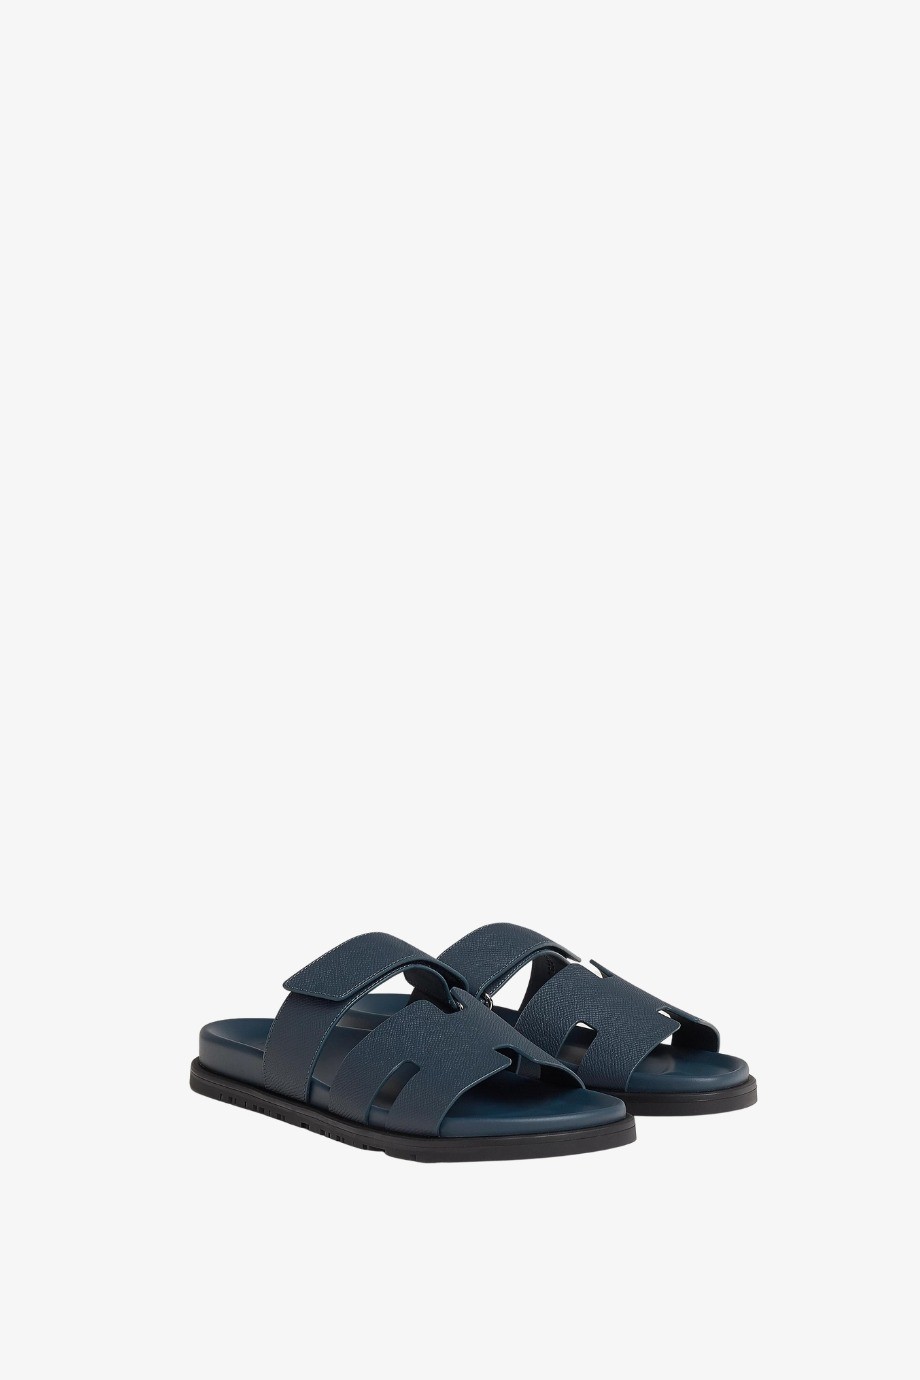 Louis Vuitton men's sandalsthese are the type you play. Trust